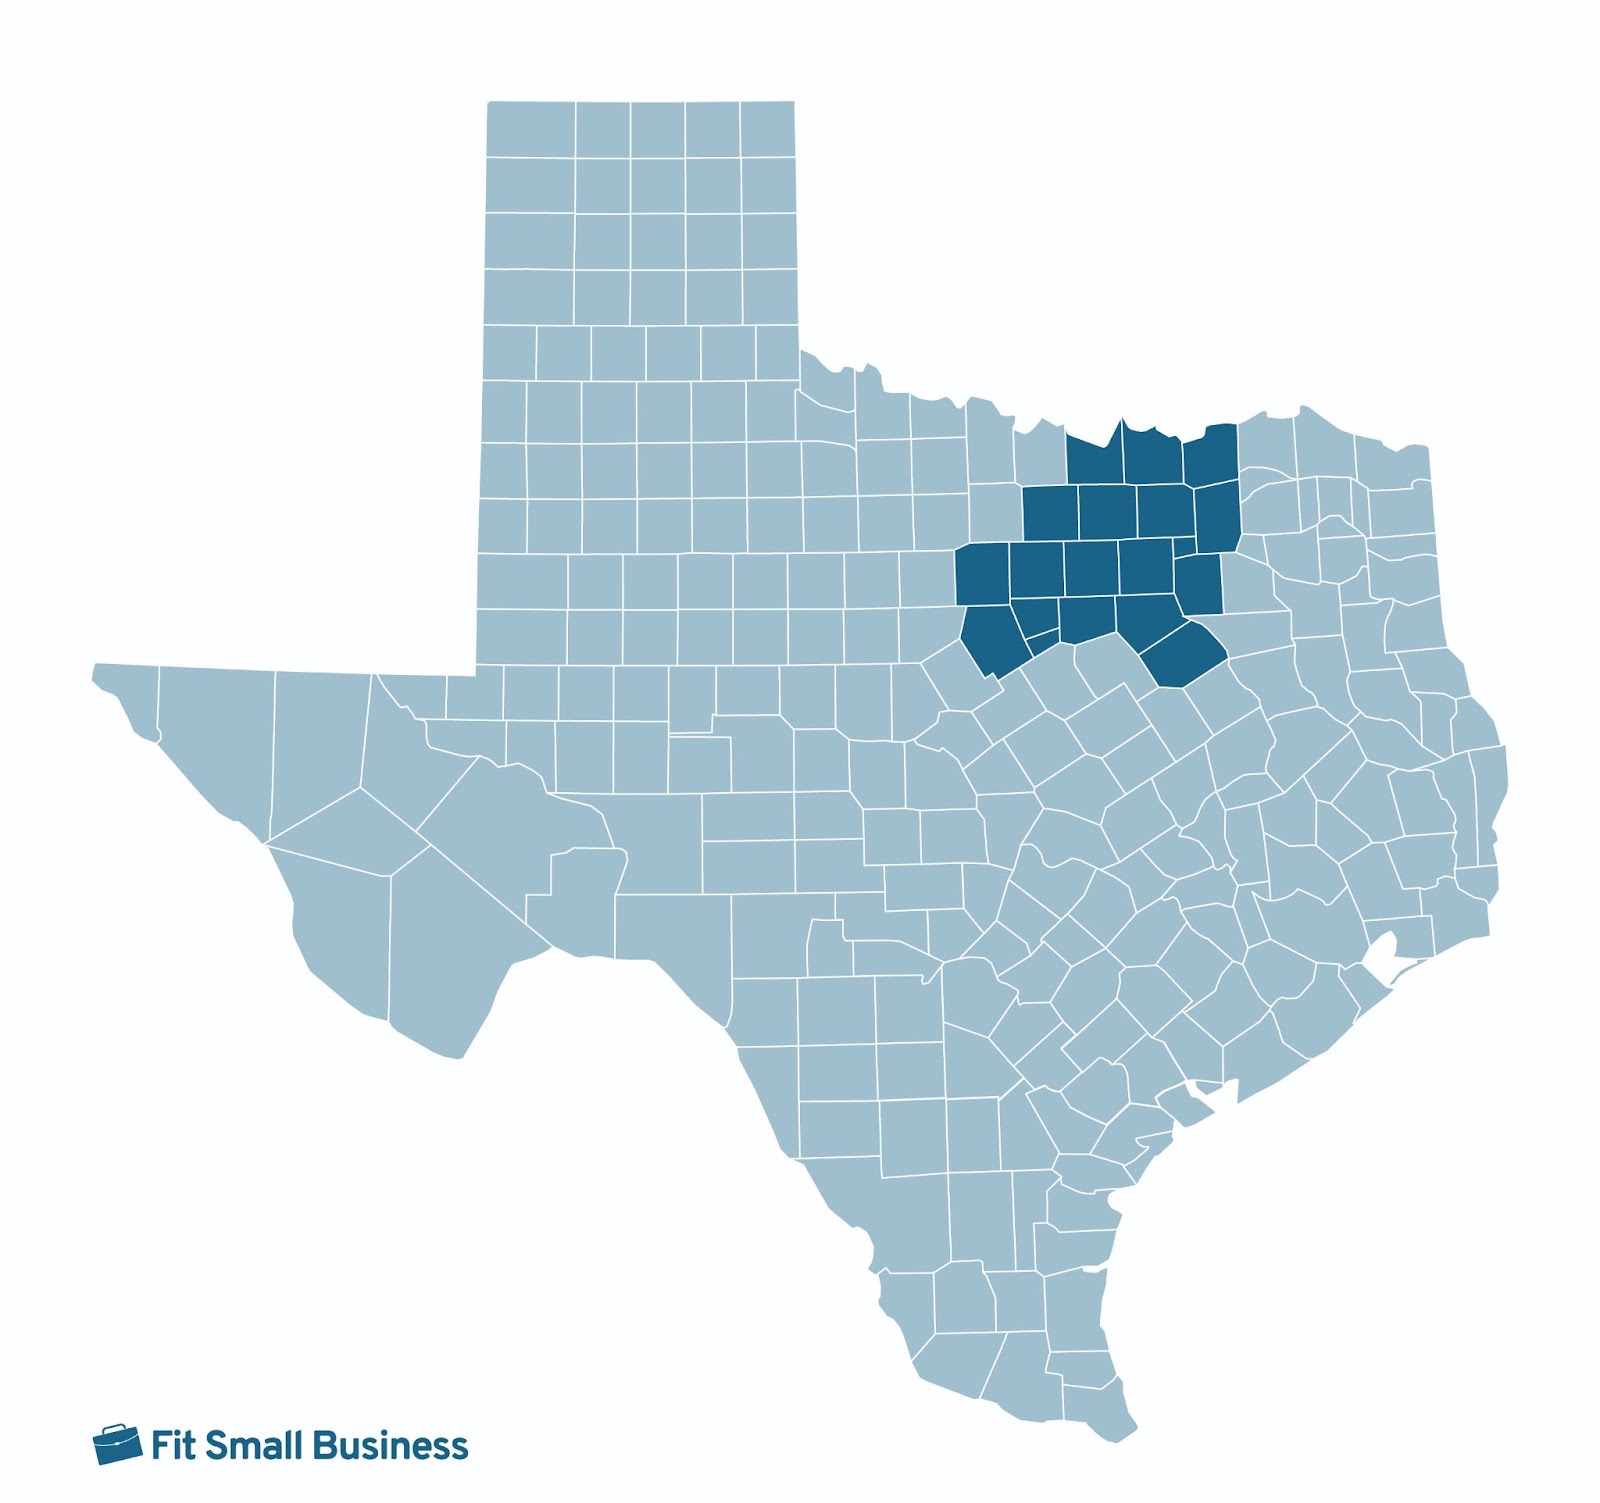 Other Business Banks in the Metroplex.